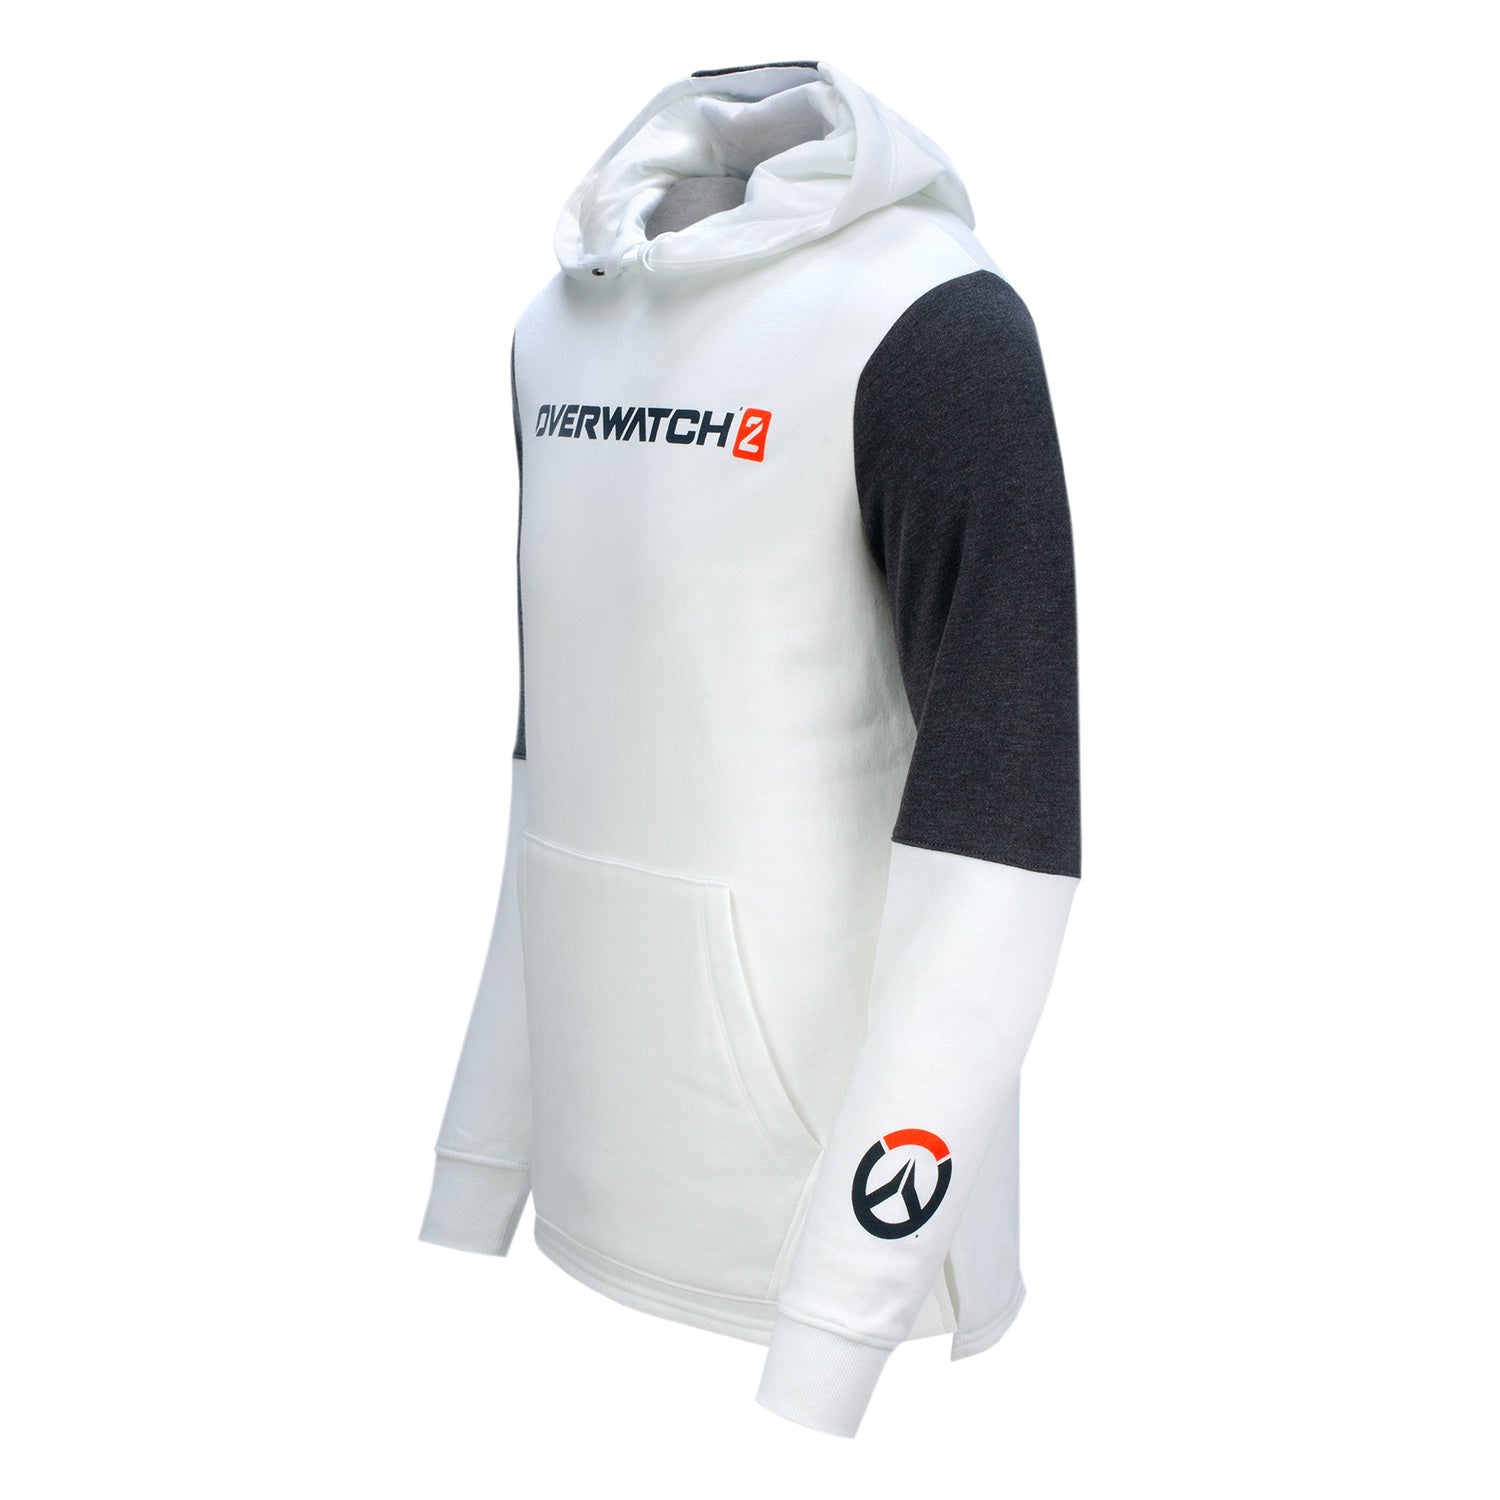 Overwatch 2 White Colorblock Hoodie - Side View 